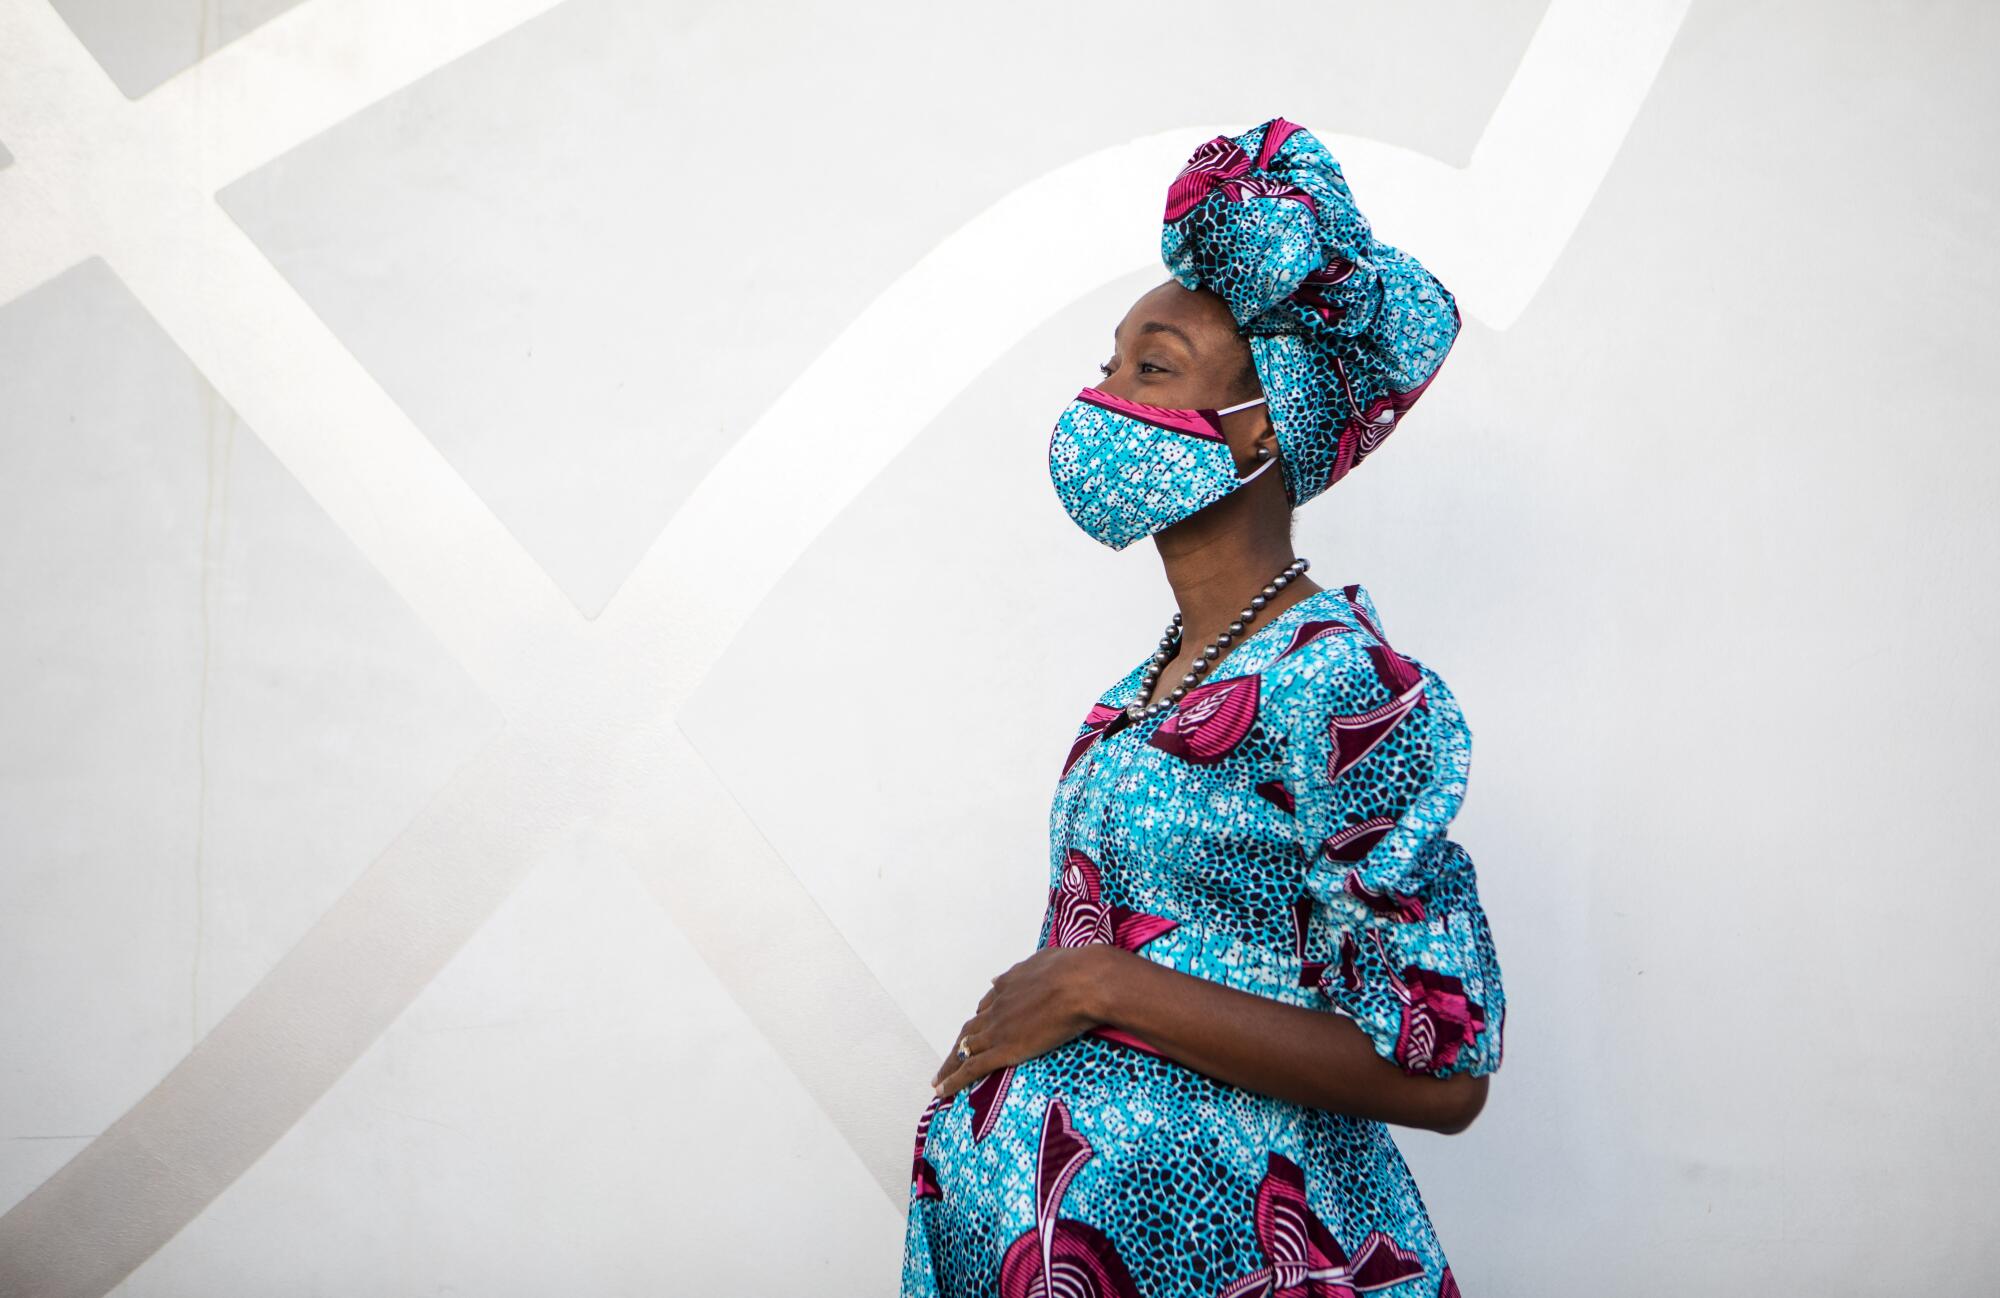 A pregnant Black woman wearing a matching turquoise dress, headscarf and face mask rests her hand on her belly